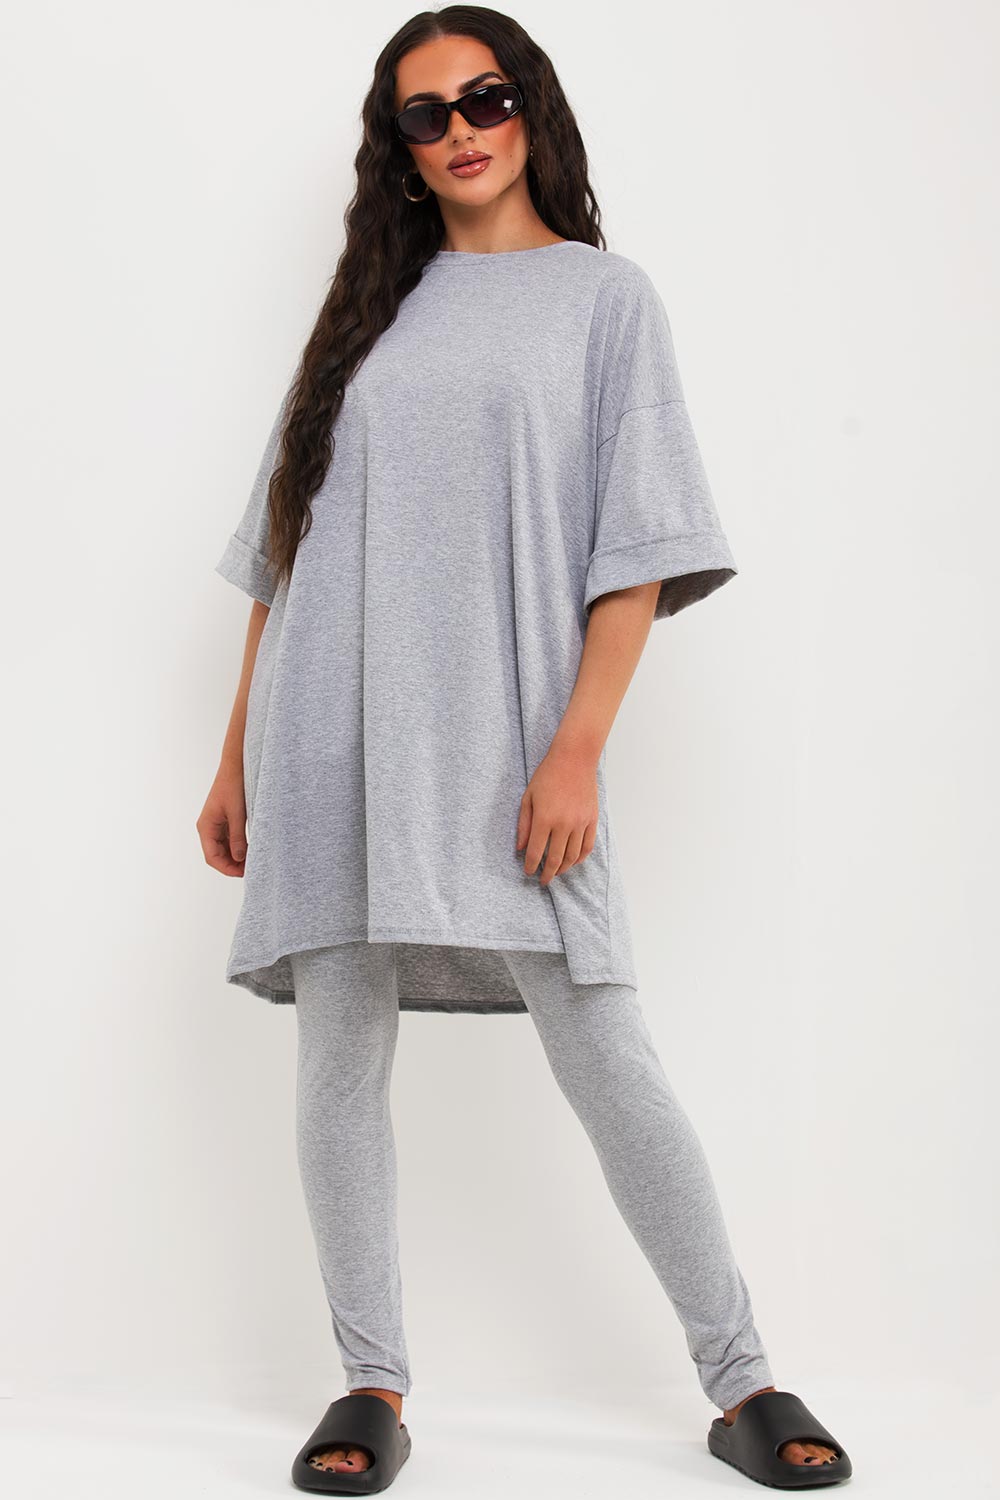 womens oversized t shirt and leggings co ord